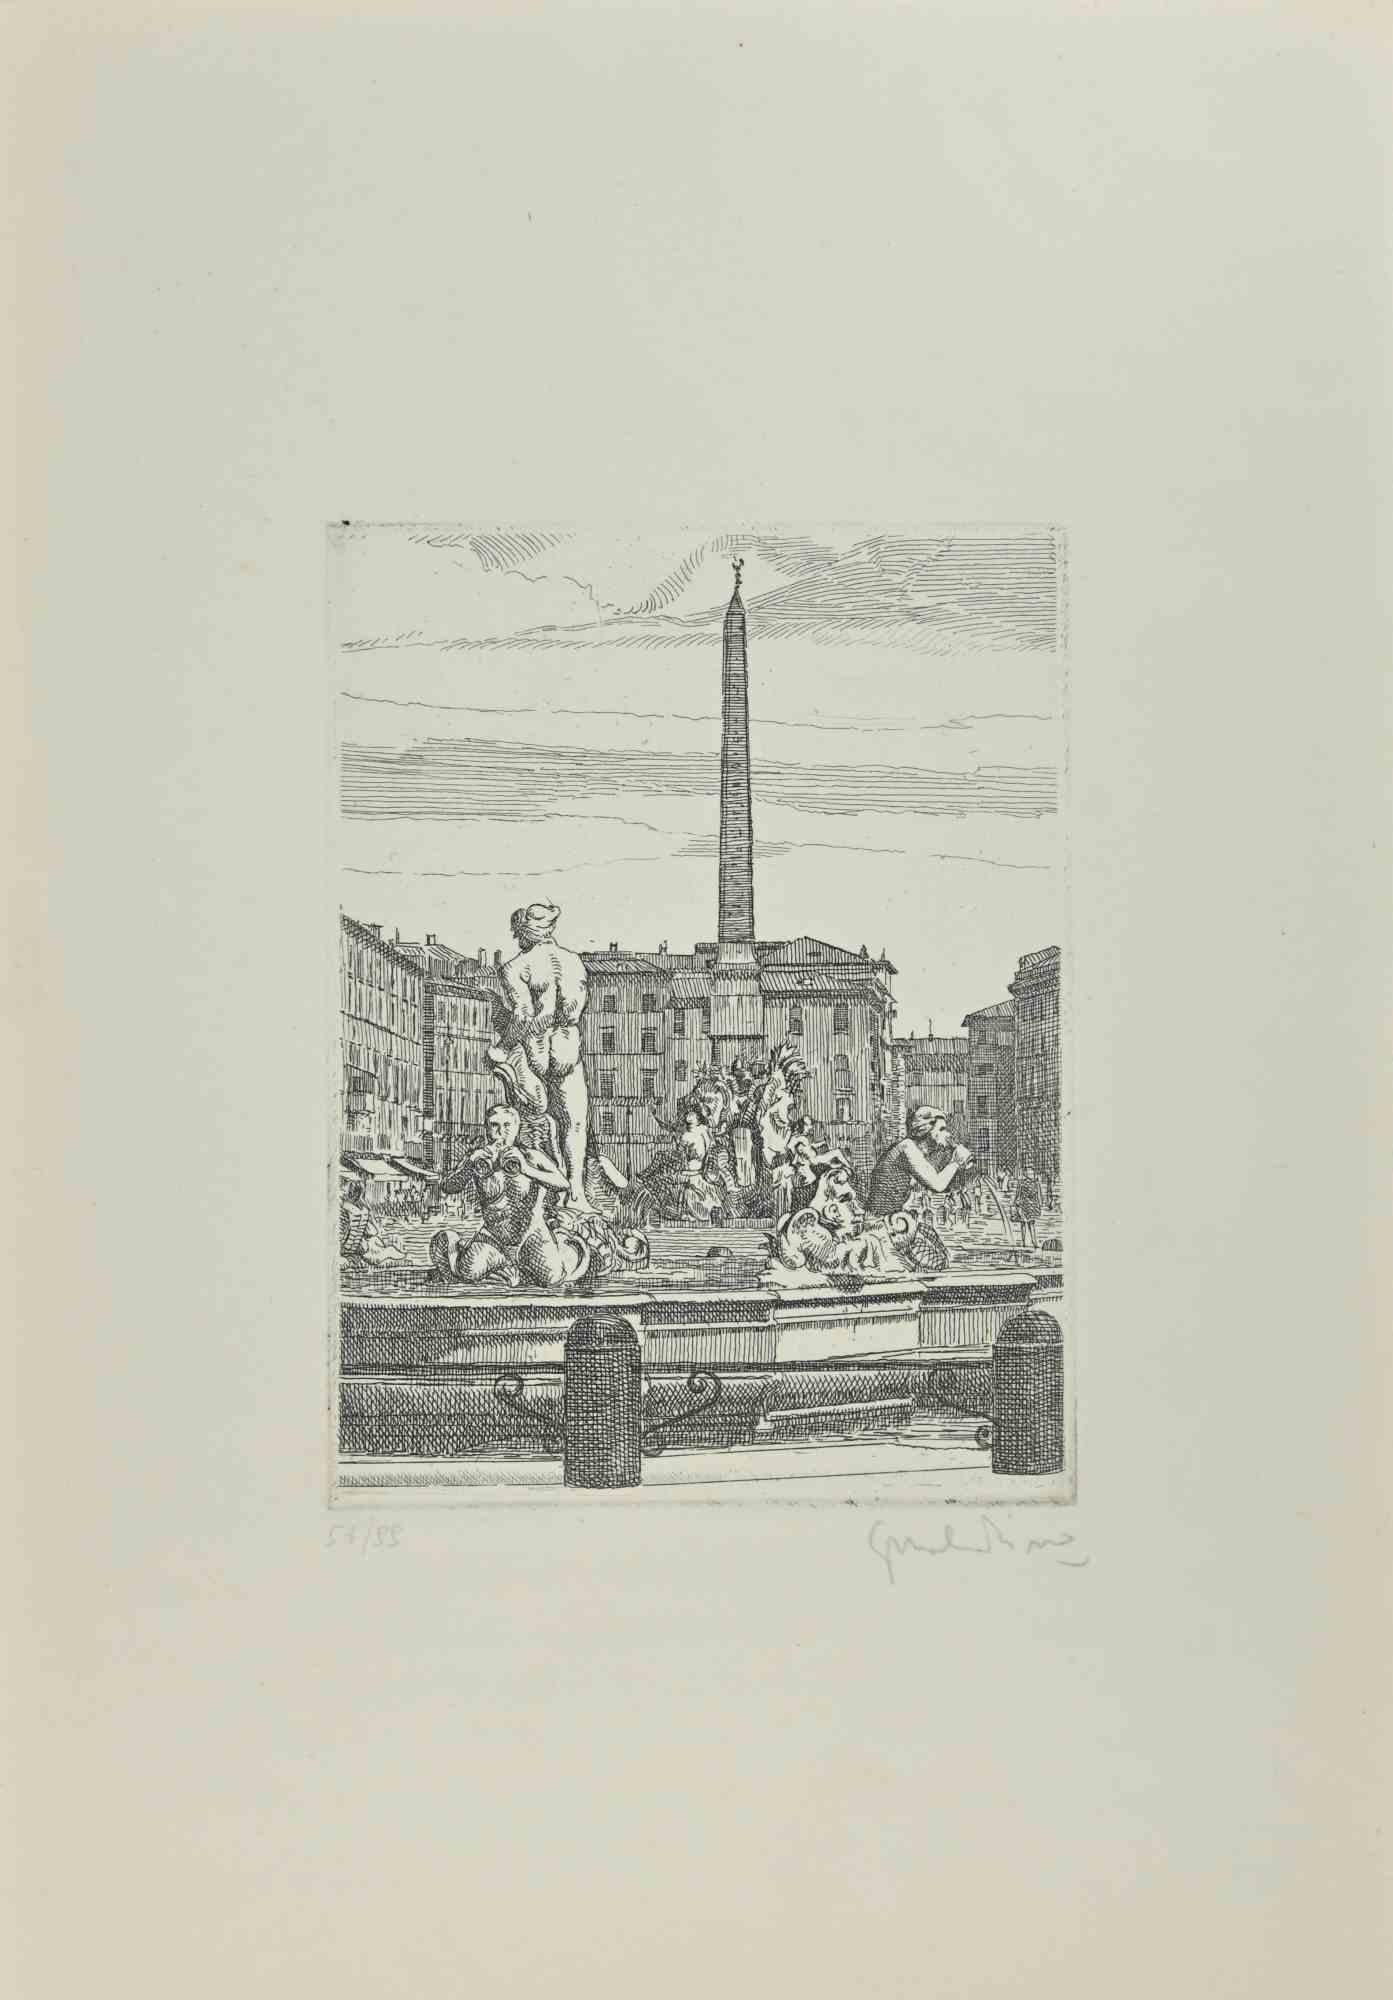 Navona Square - Fountain of 4 Rivers is an artwork realized by Giuseppe Malandrino.

Original print in etching technique.

Hand-signed by the artist in pencil on the lower right corner.

Numbered edition of 99 copies.

Good condition. 

This artwork